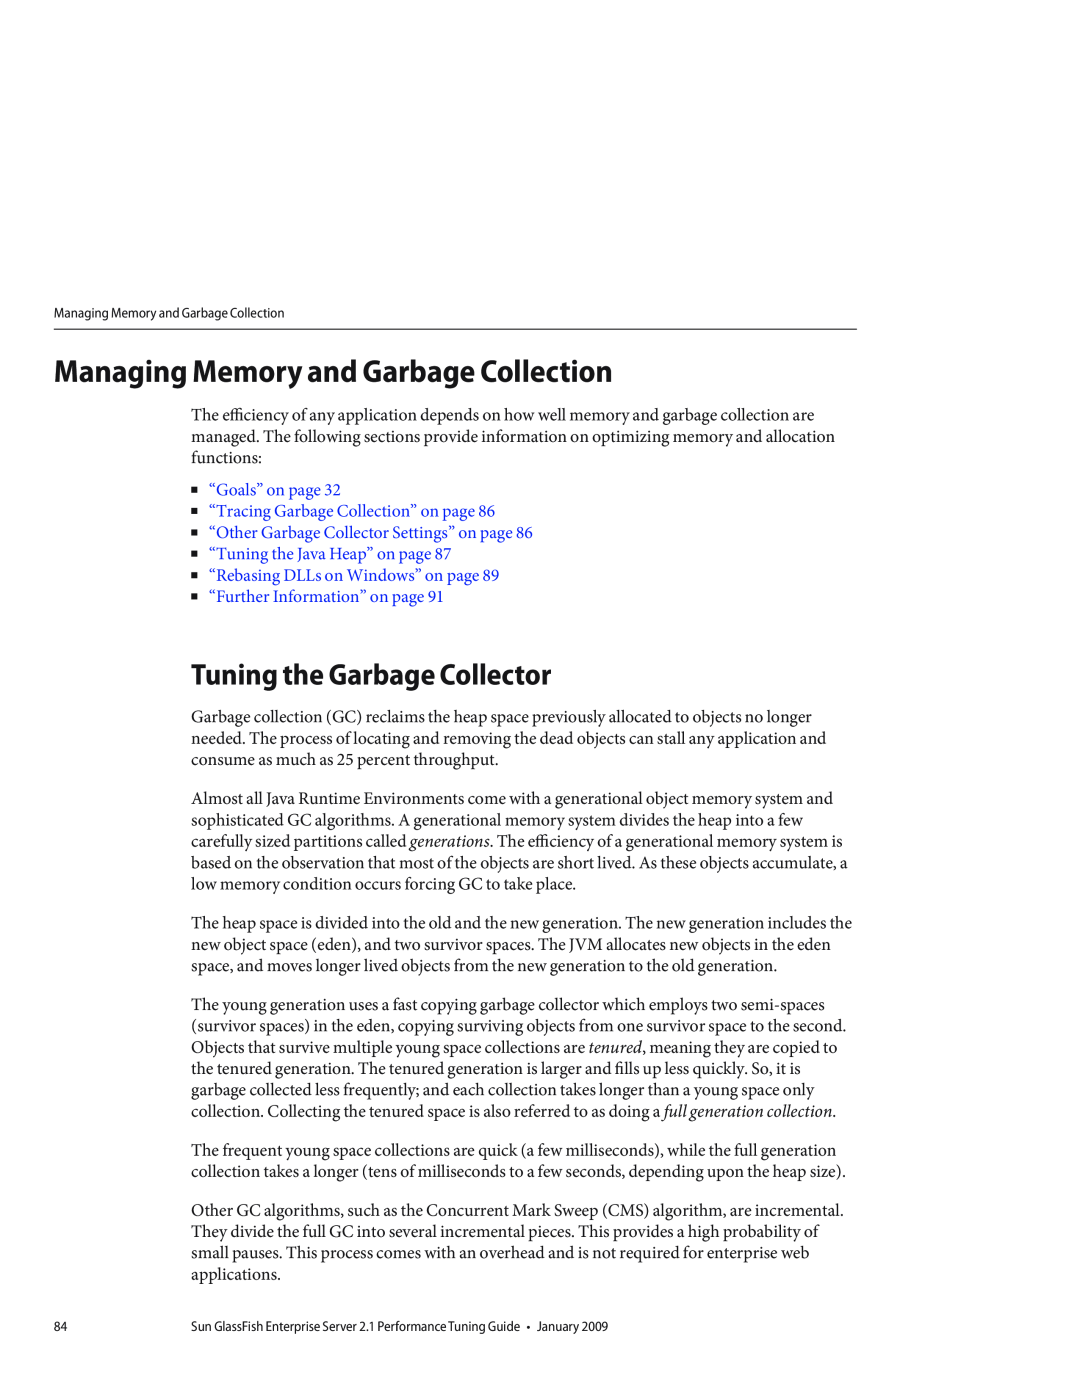 Sun Microsystems 820434310 manual Managing Memory and Garbage Collection, Tuning the Garbage Collector 